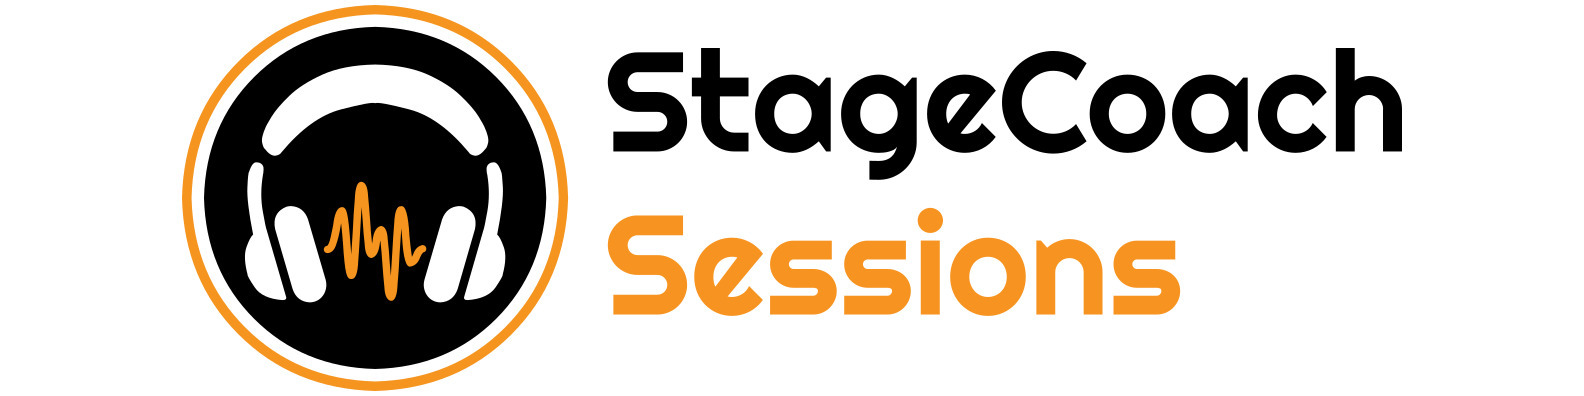 StageCoach Sessions